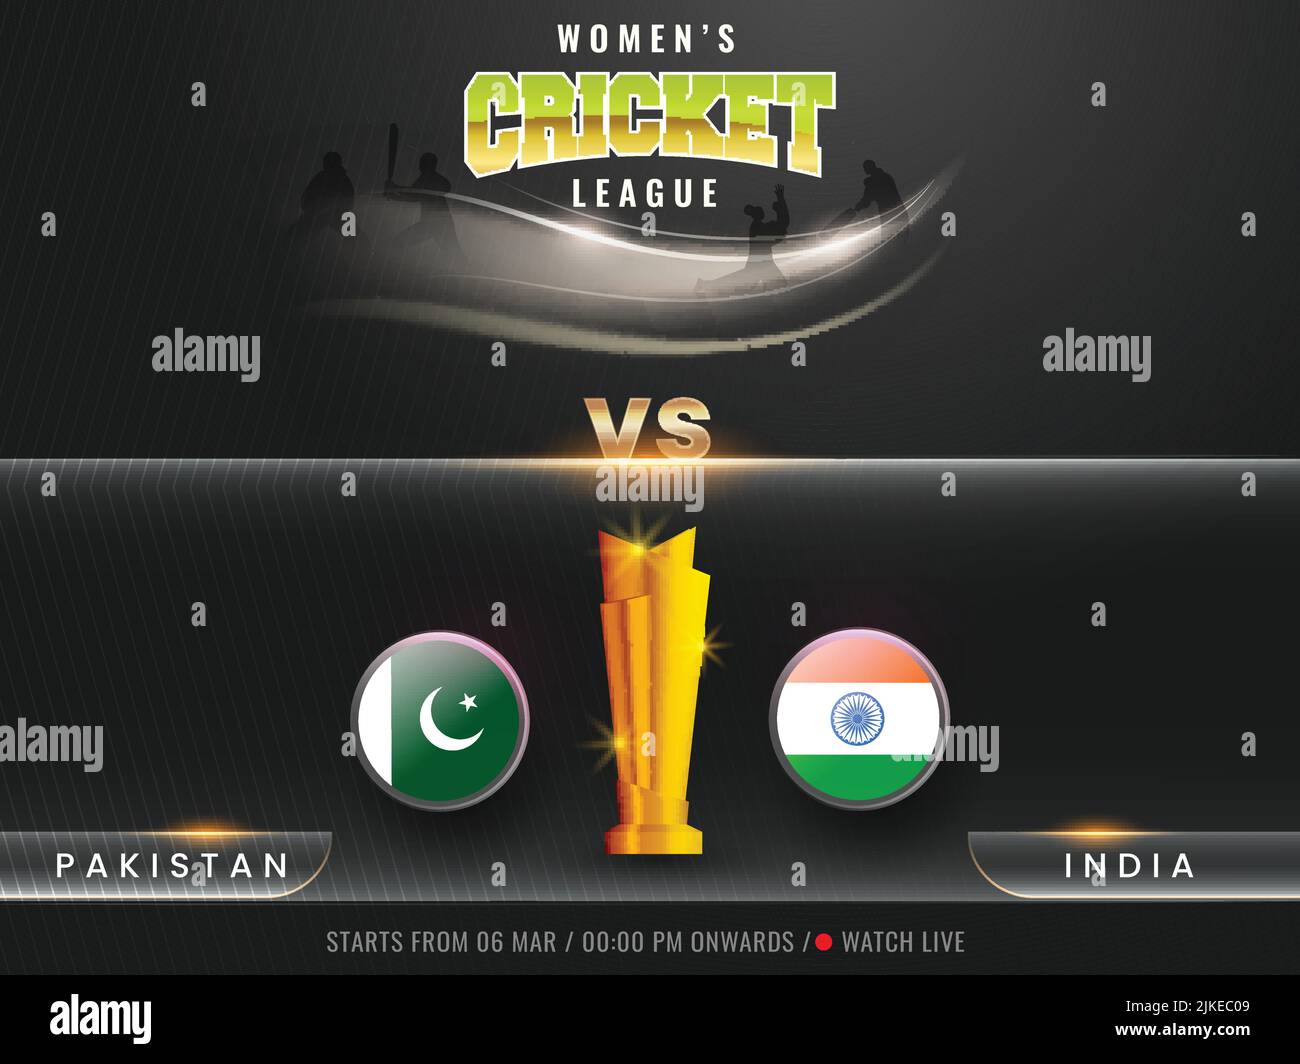 Women's Cricket Match Watch Live Show Of Participating Team Pakistan VS India, 3D Shiny Winning Trophy Cup On Black Silhouette Players Background. Stock Vector